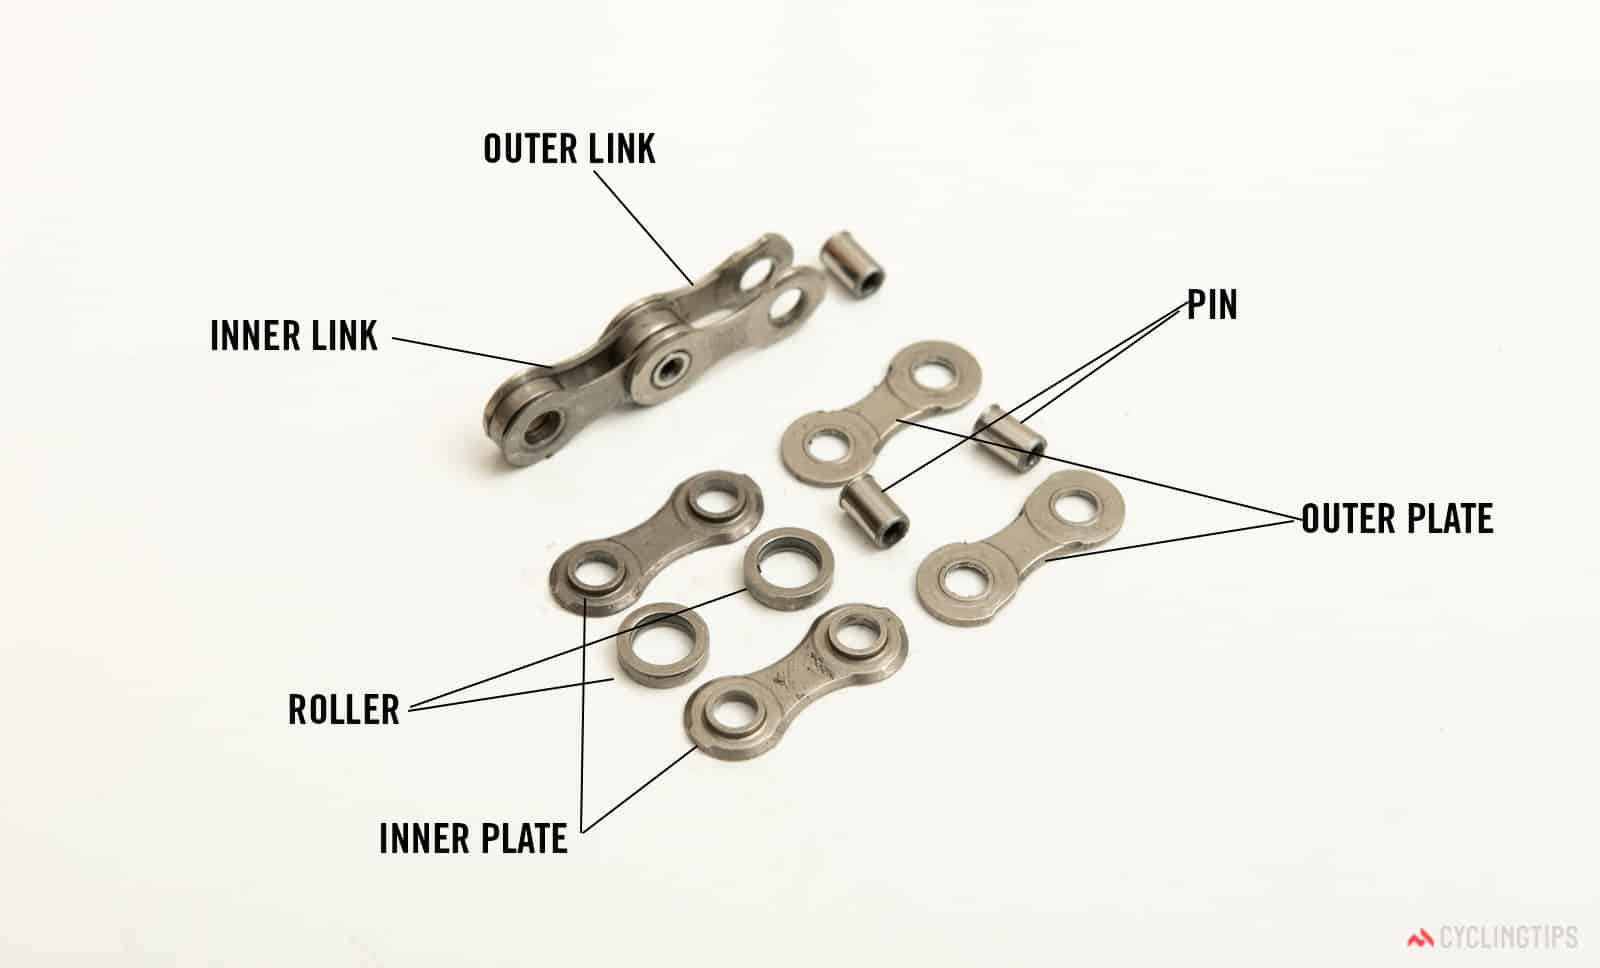 It is easy to fix a mountain bike chain as long as you have the right tools and know exactly how the chain is constructed.